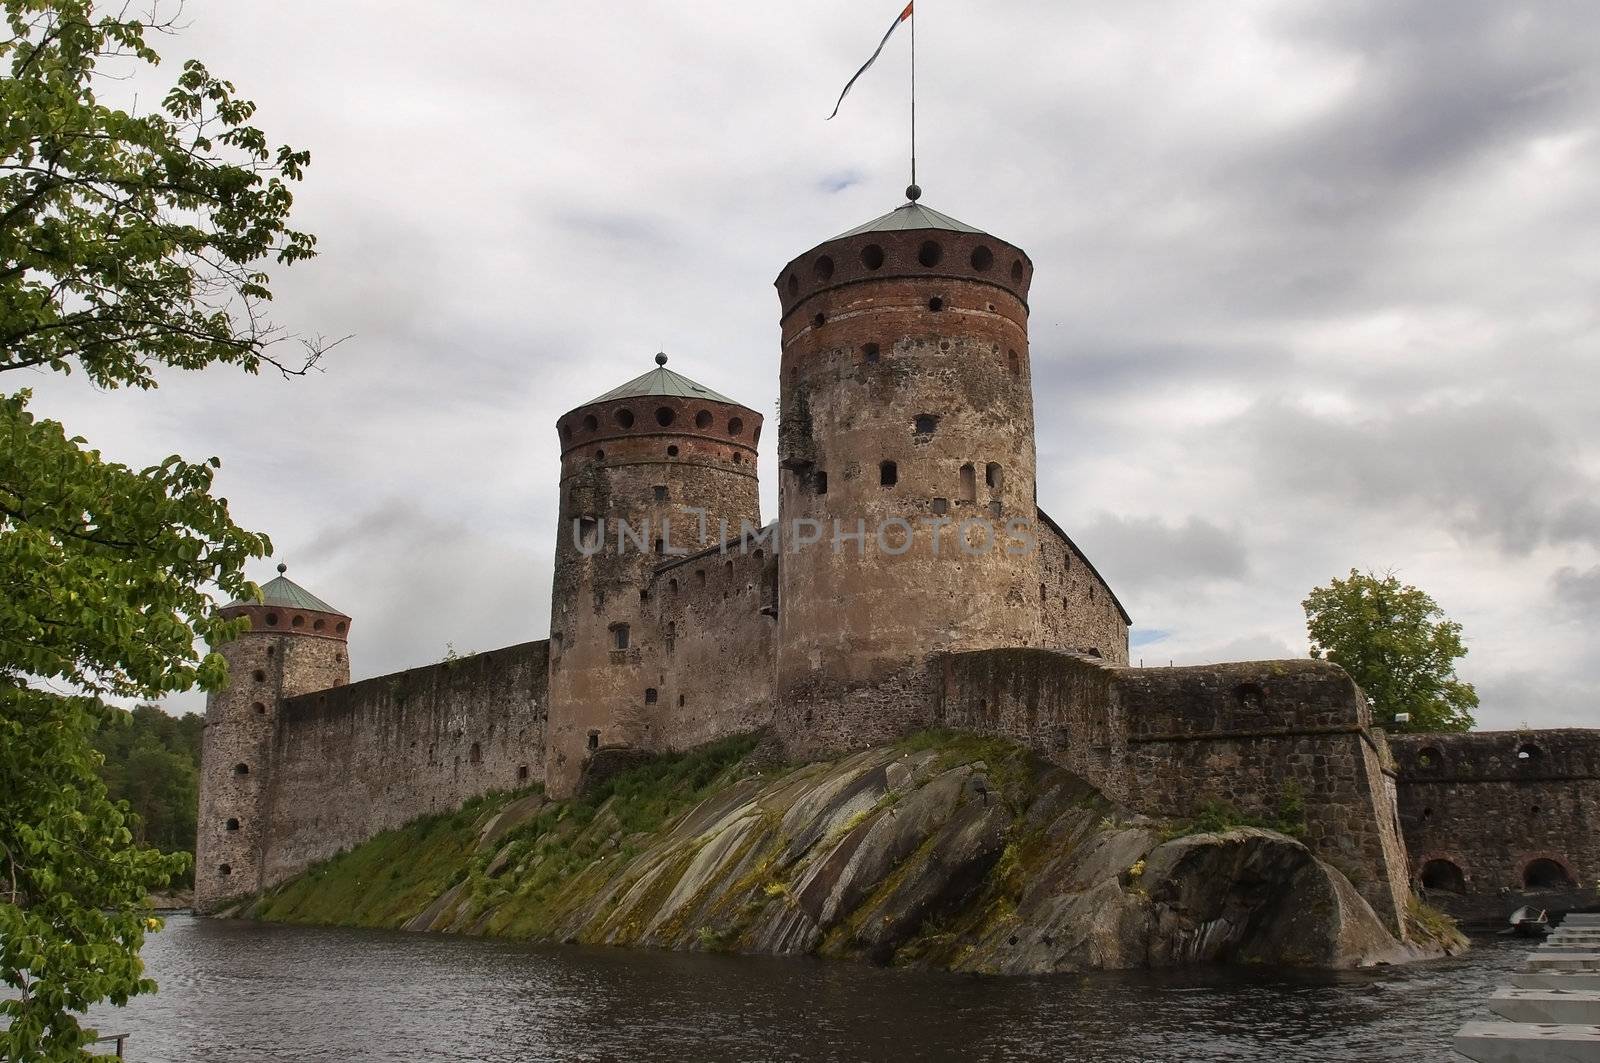 the fortress town of Savonlinna by irisphoto4